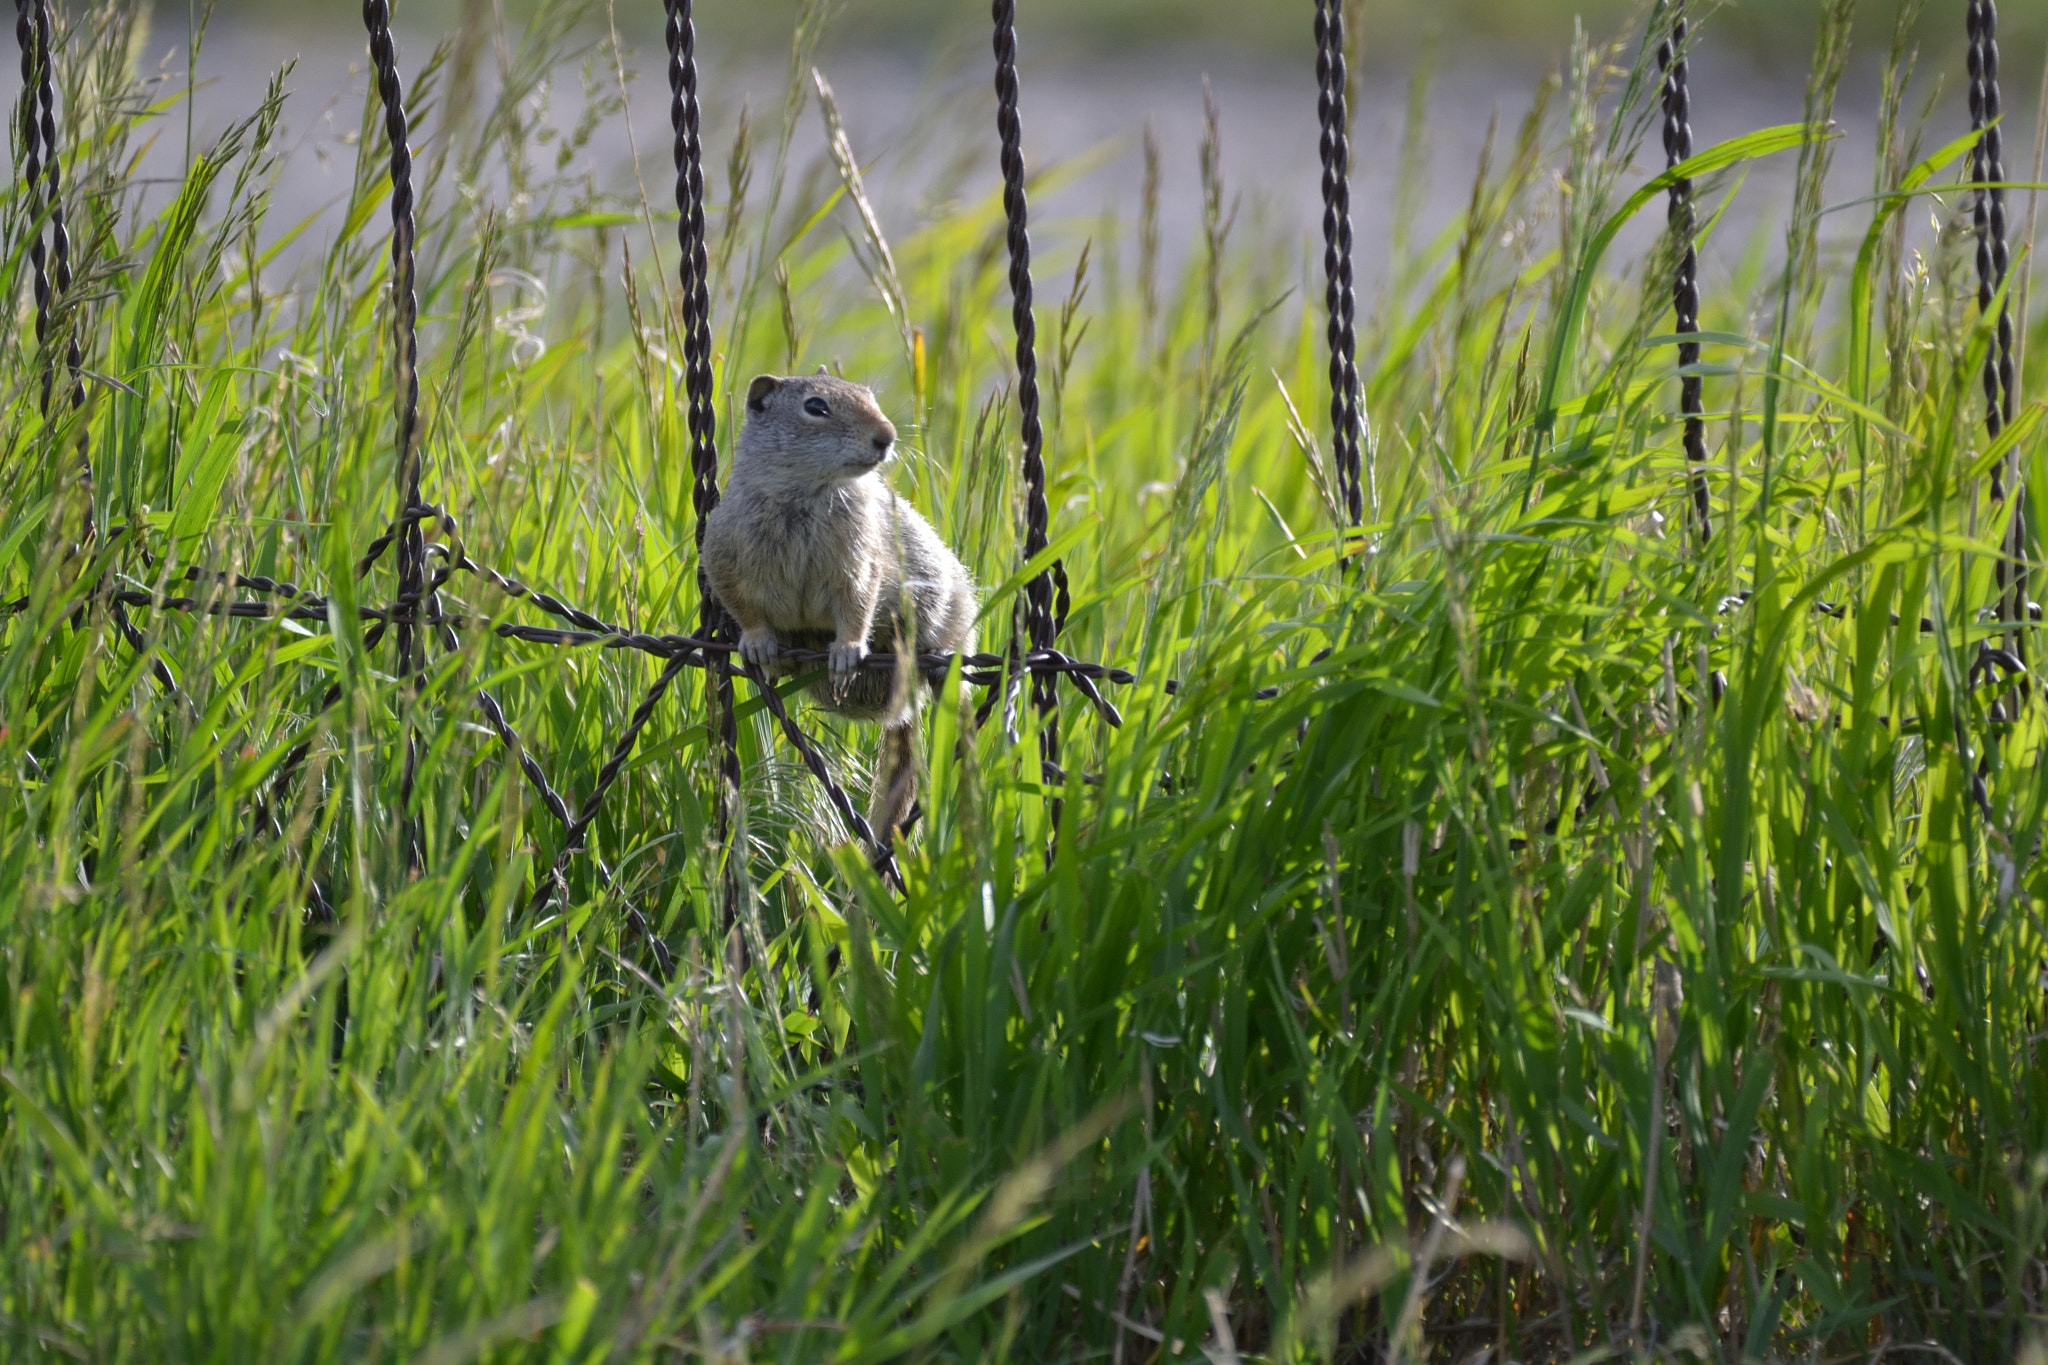 Nikon D3100 + Sigma 150-600mm F5-6.3 DG OS HSM | C sample photo. Ground squirrel on the fence photography